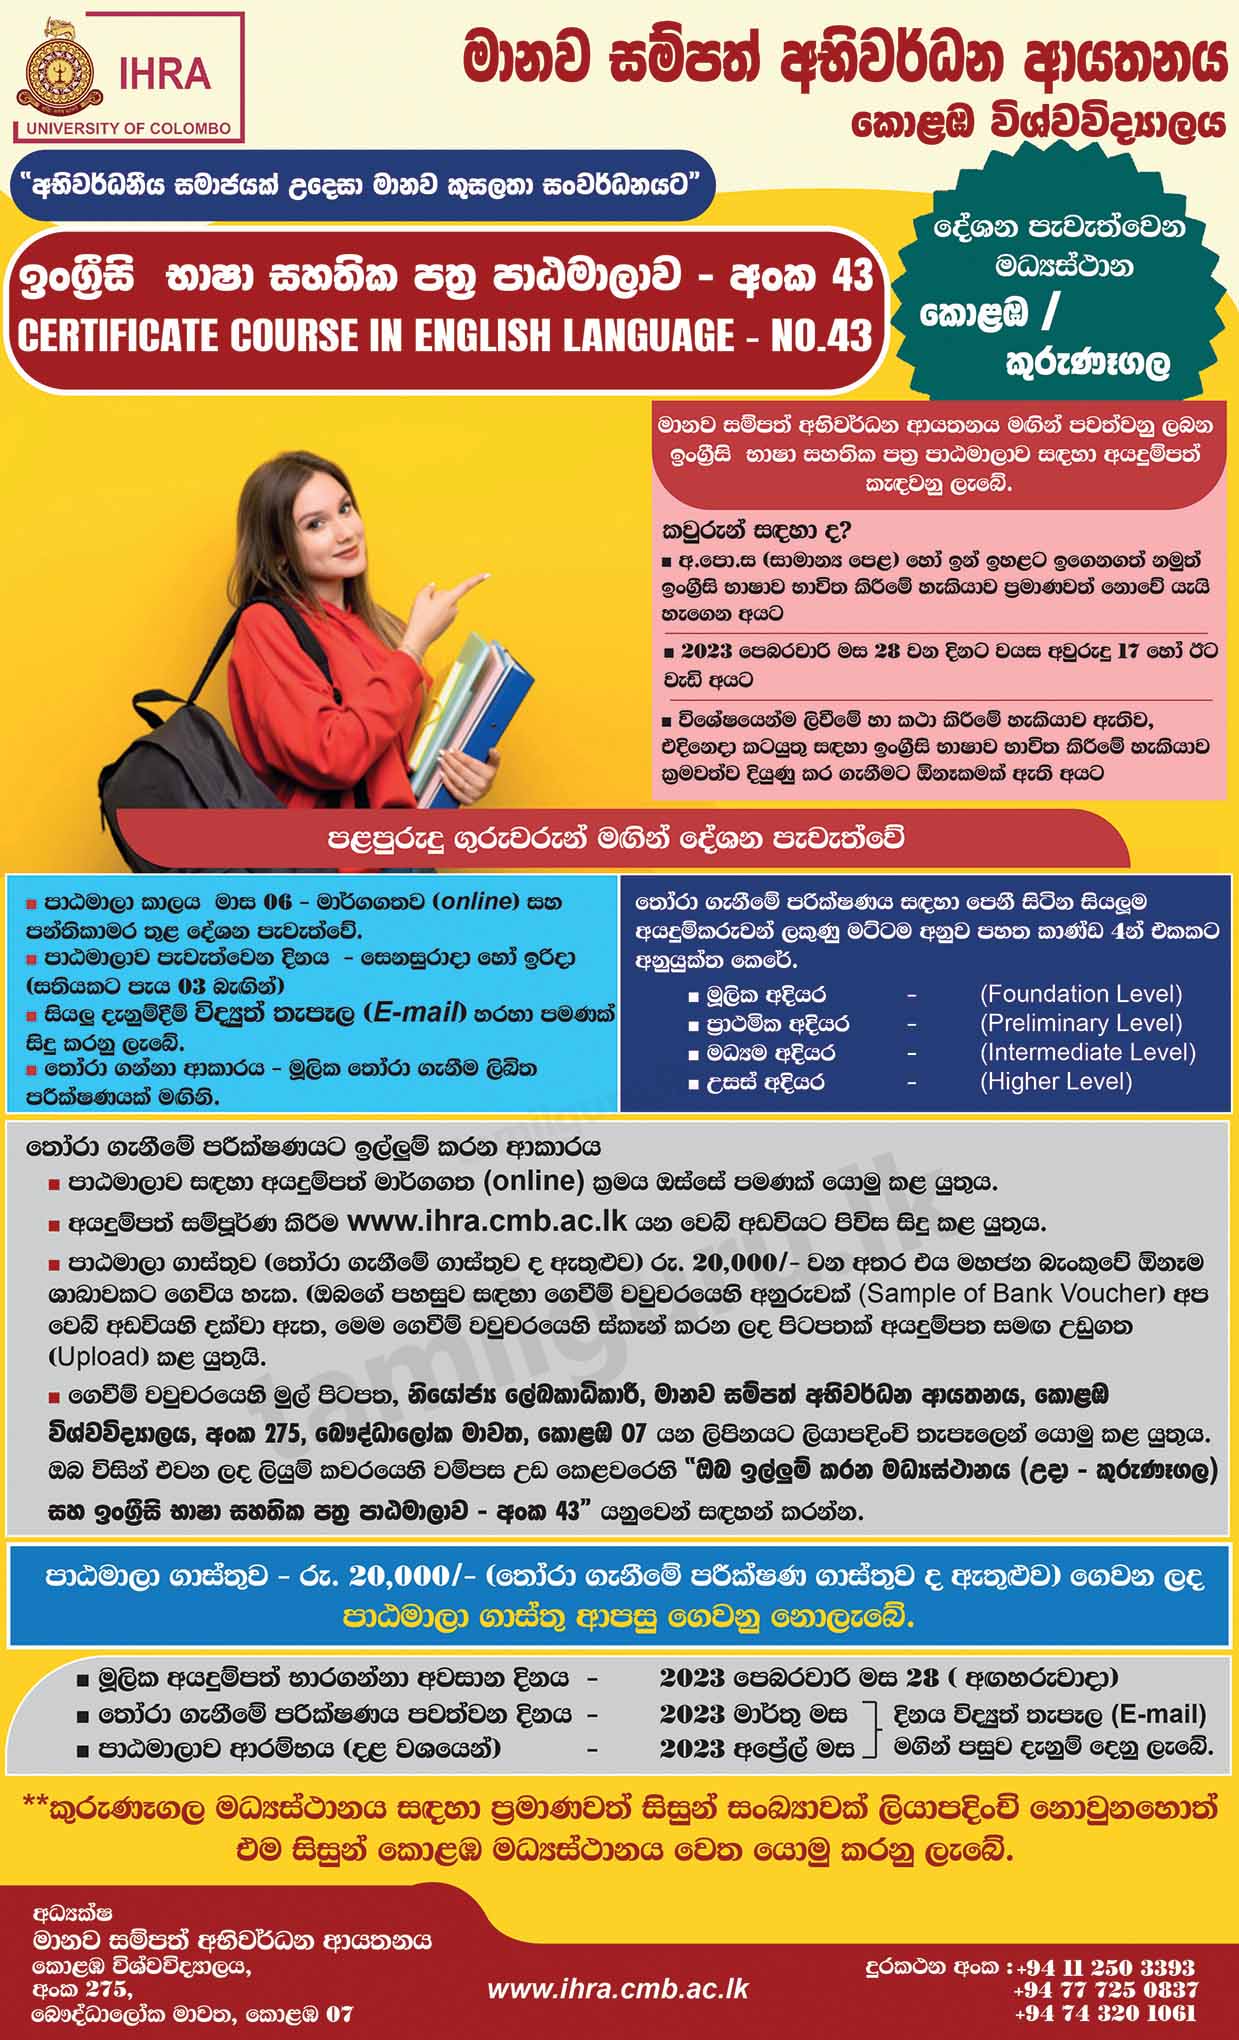 Certificate Course in English Language 2023 - University of Colombo (IHRA)